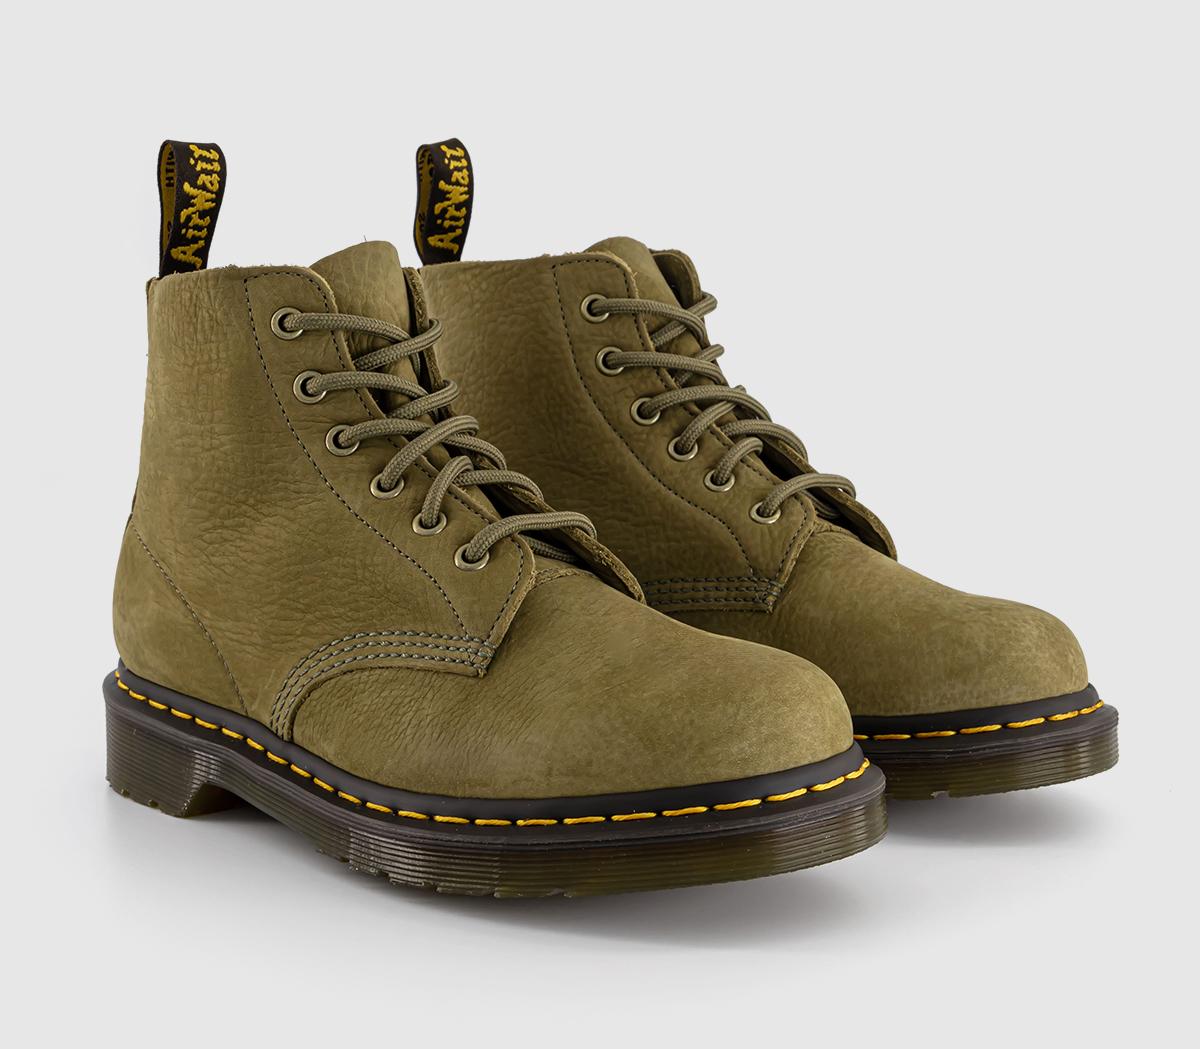 Dr. Martens Womens 101 6 Eye Boots Muted Olive Green, 8